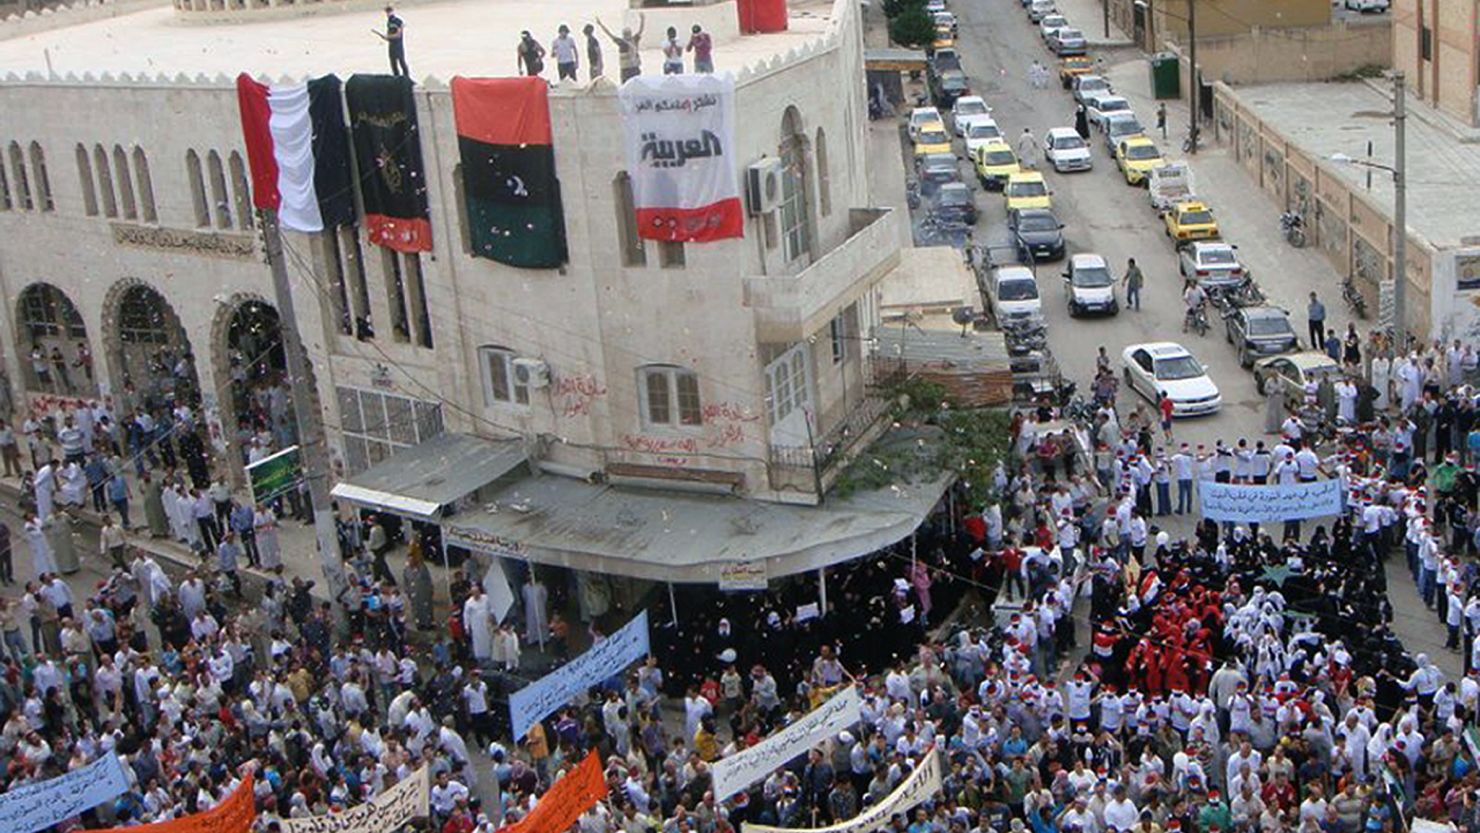 Anti-government protesters march in Idlib, Syria, on Friday, as more people were reported killed.